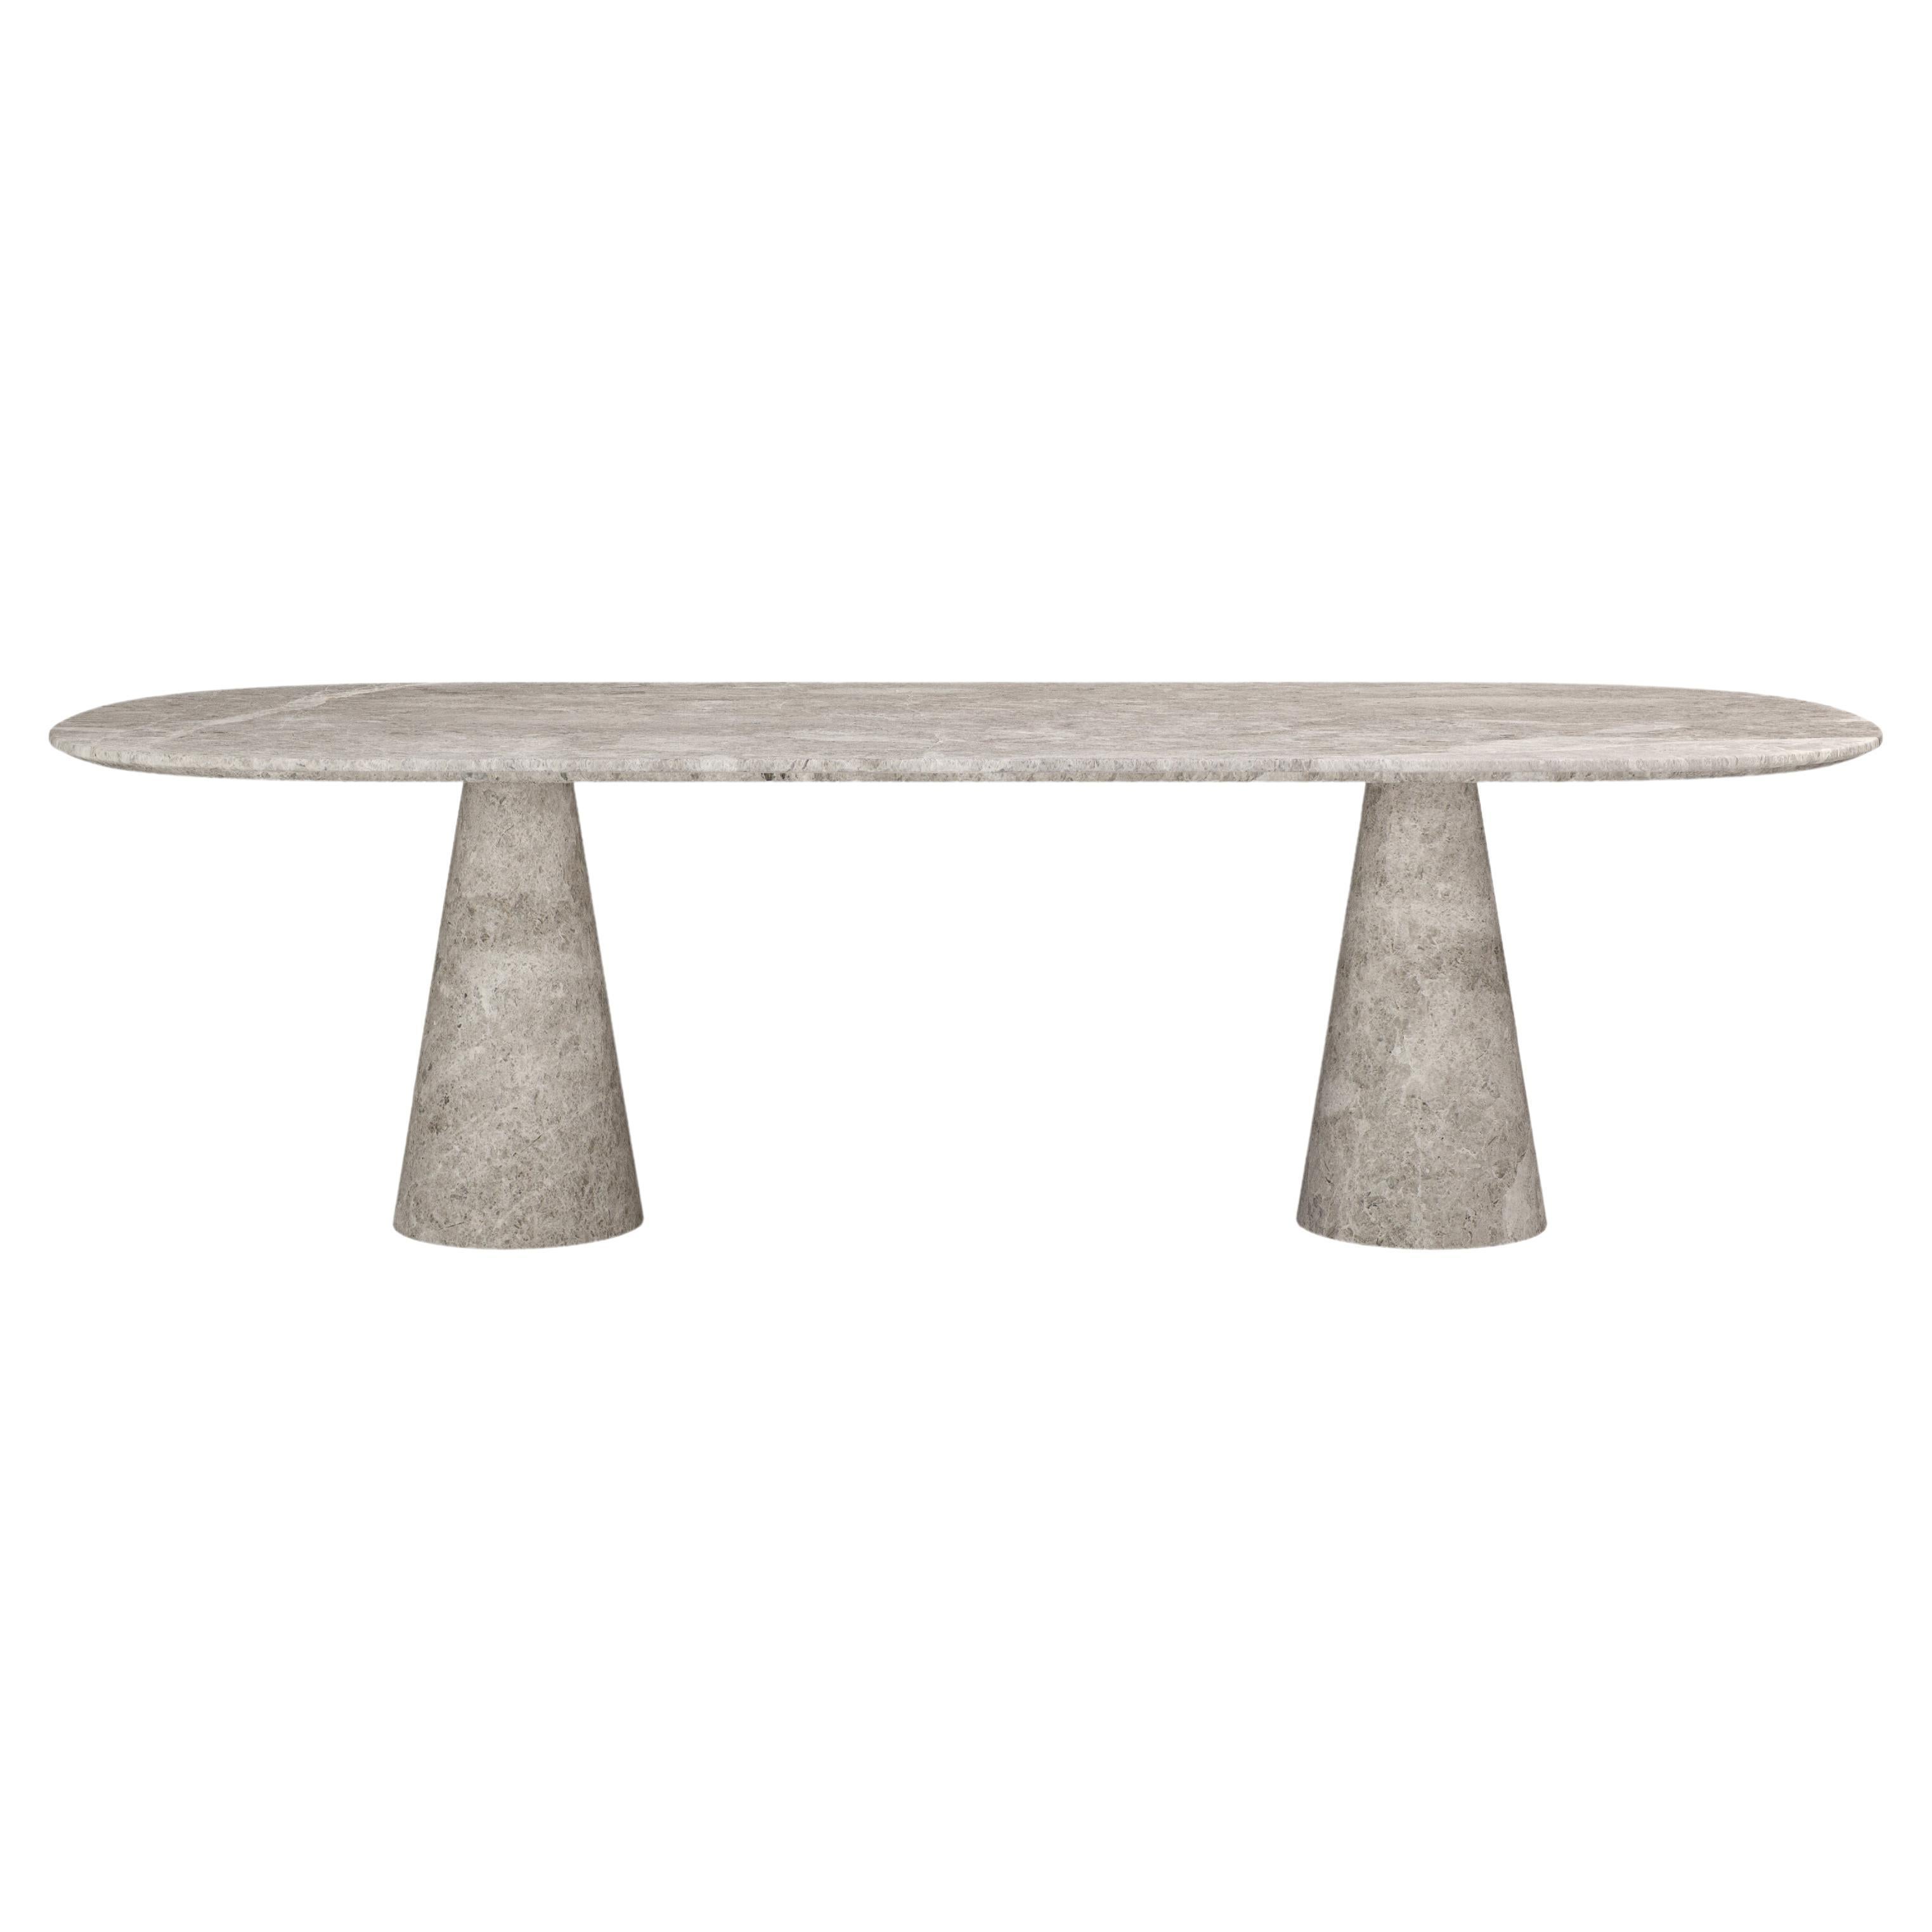 FORM(LA) Cono Oval Dining Table 96”L x 42”W x 30”H Tundra Gray Marble For Sale